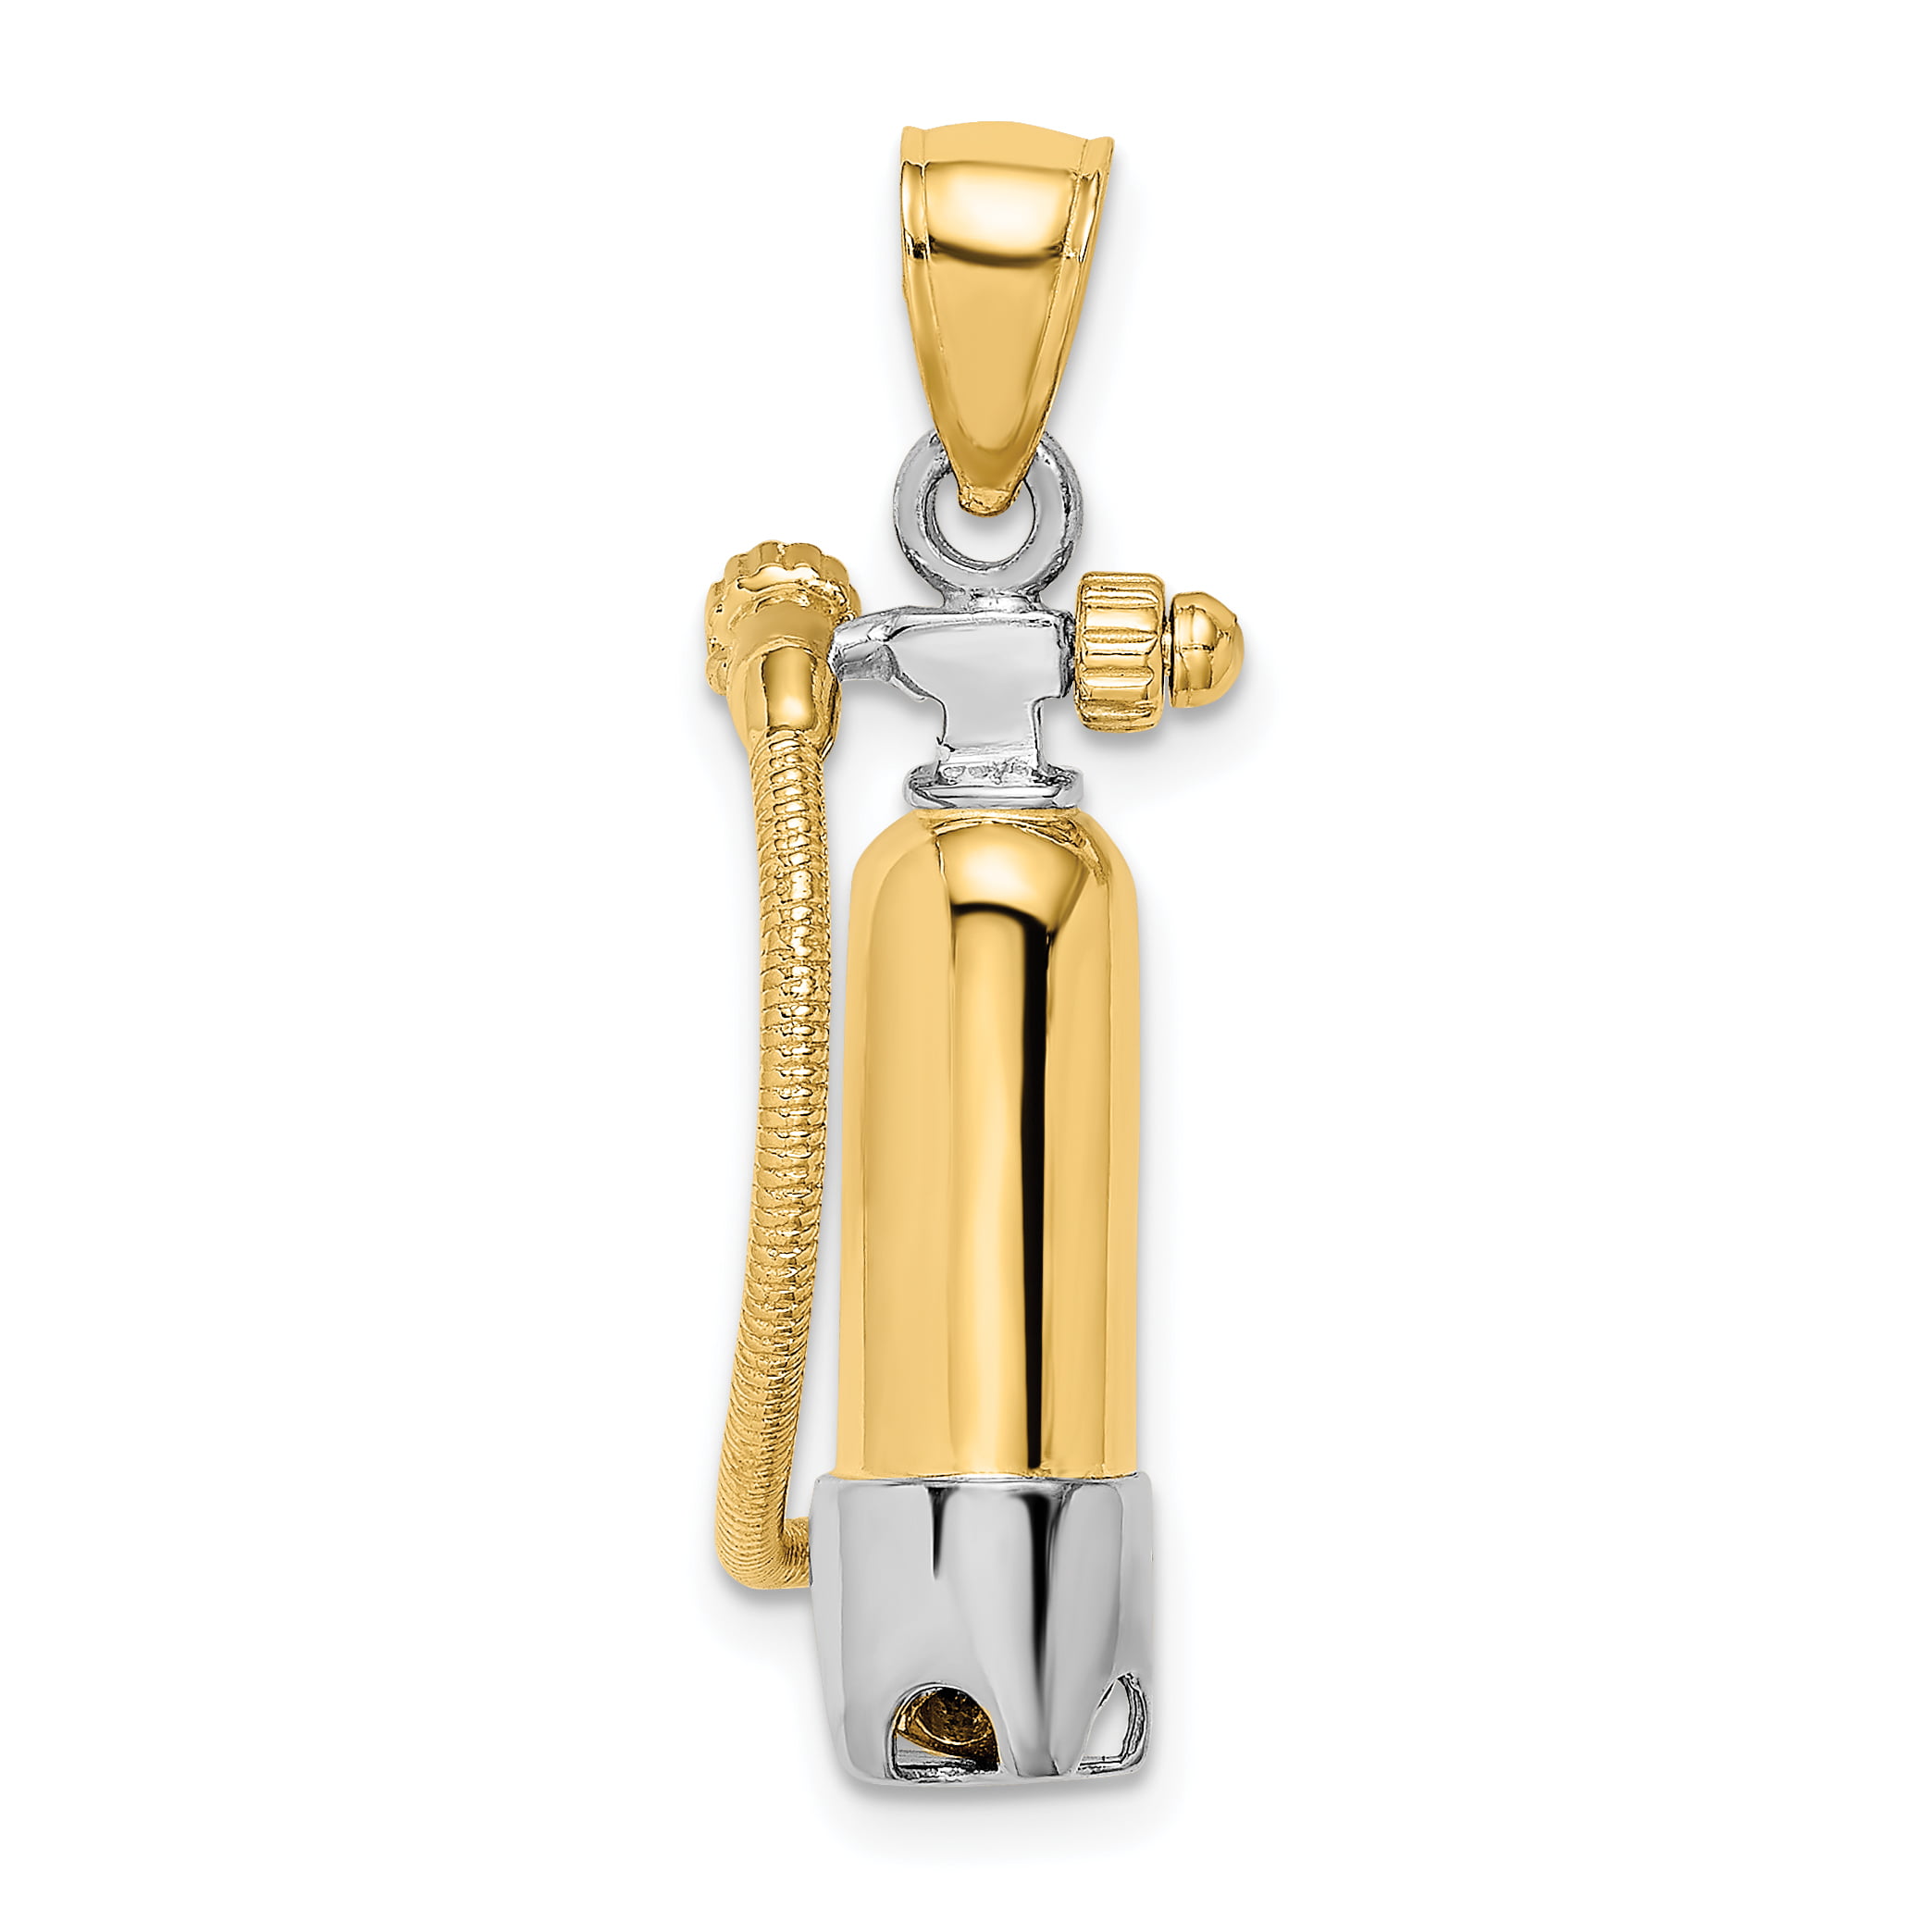 14K Yellow Gold 3-D Diver Pendant on an Adjustable 14K Yellow Gold Chain Necklace